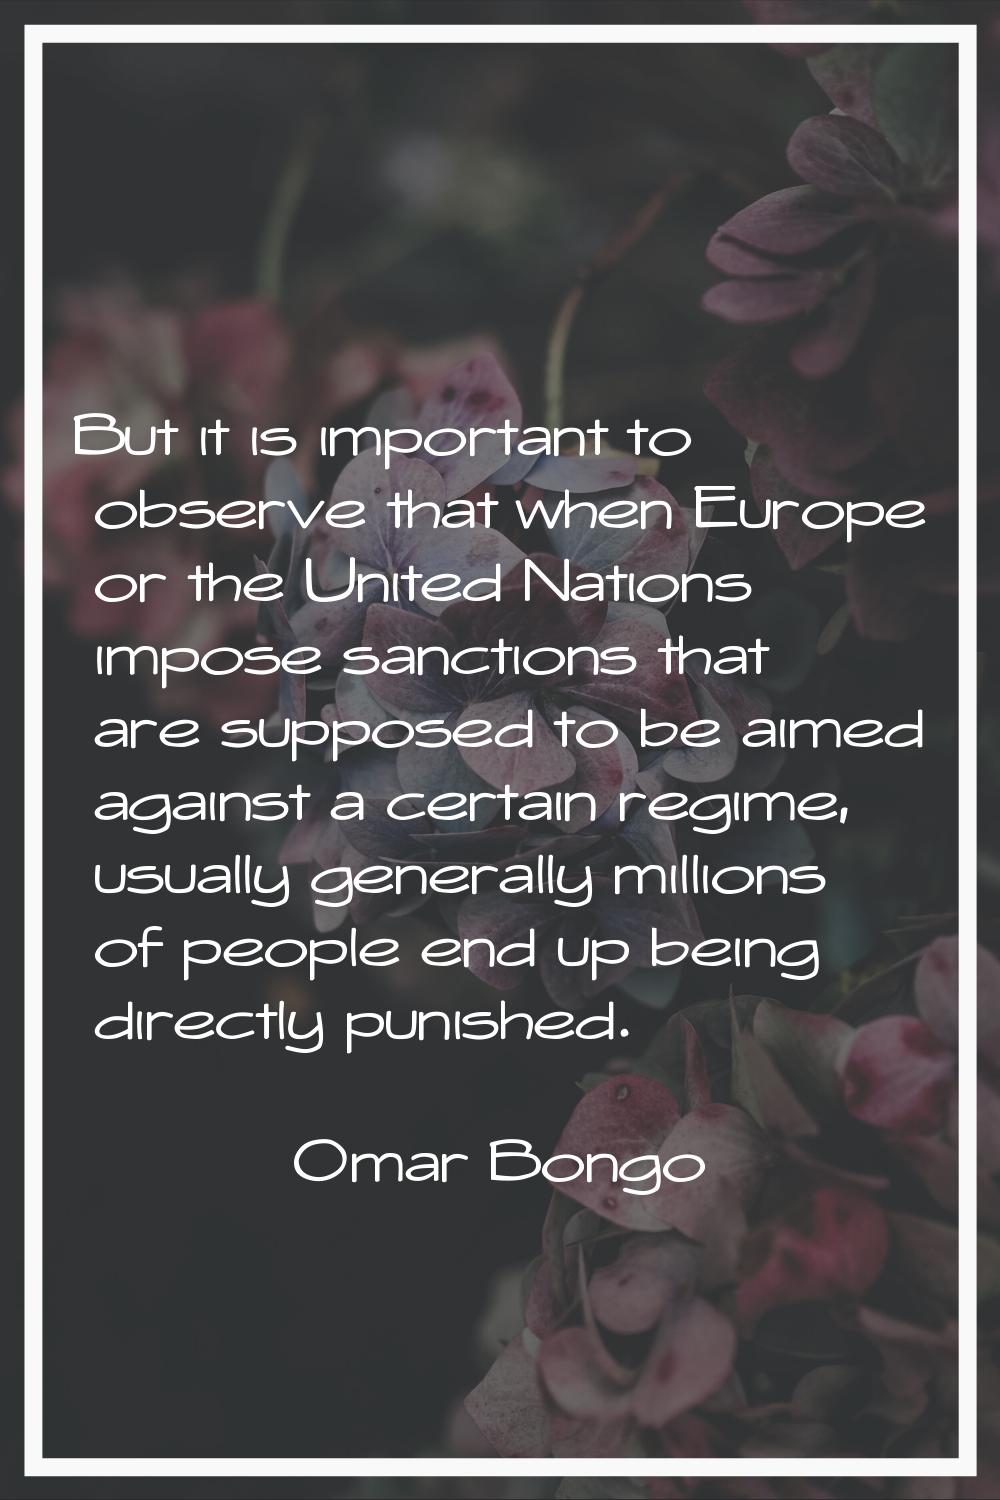 But it is important to observe that when Europe or the United Nations impose sanctions that are sup